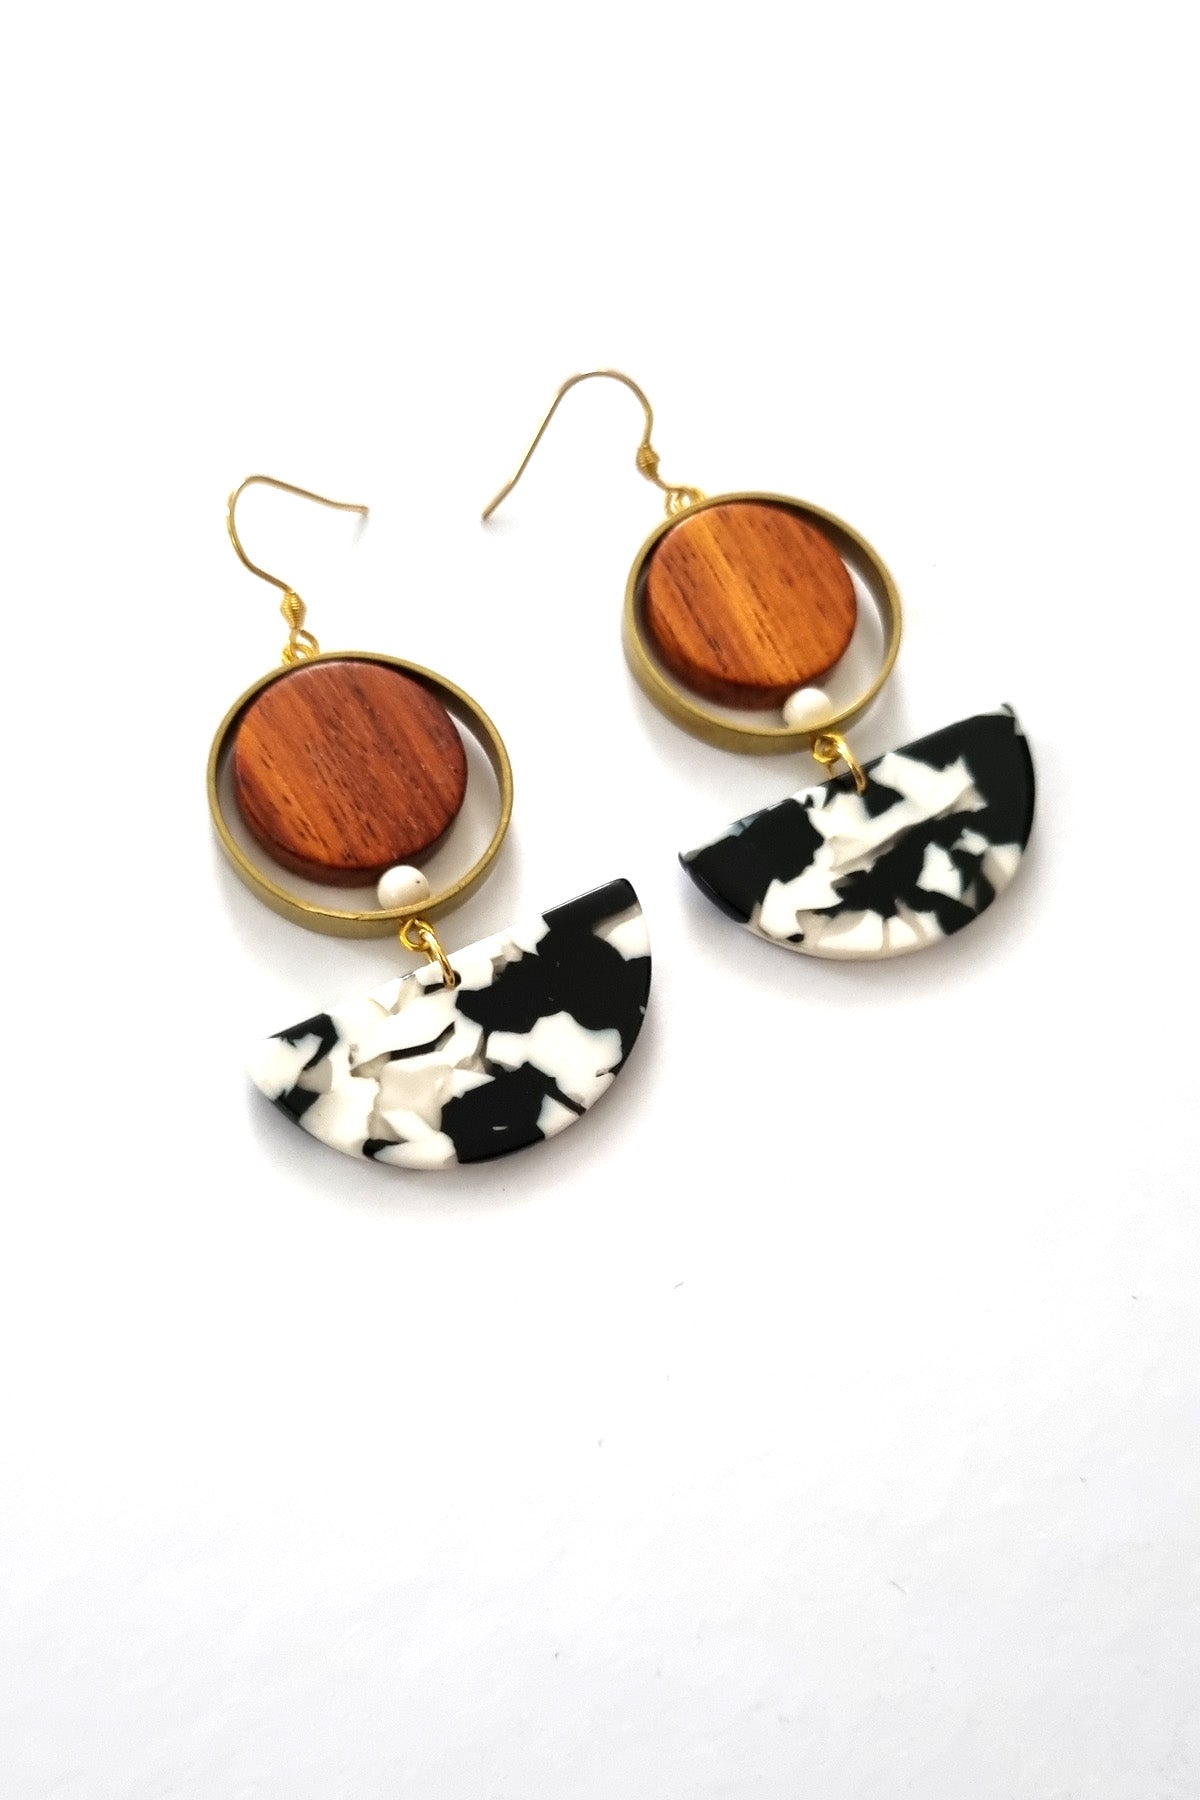 A pair of hook dangle earrings sit against a white background. They feature a circular wooden bead and a small white bead encircled by a brass ring. Below dangles a black and white D-shaped acrylic piece. 